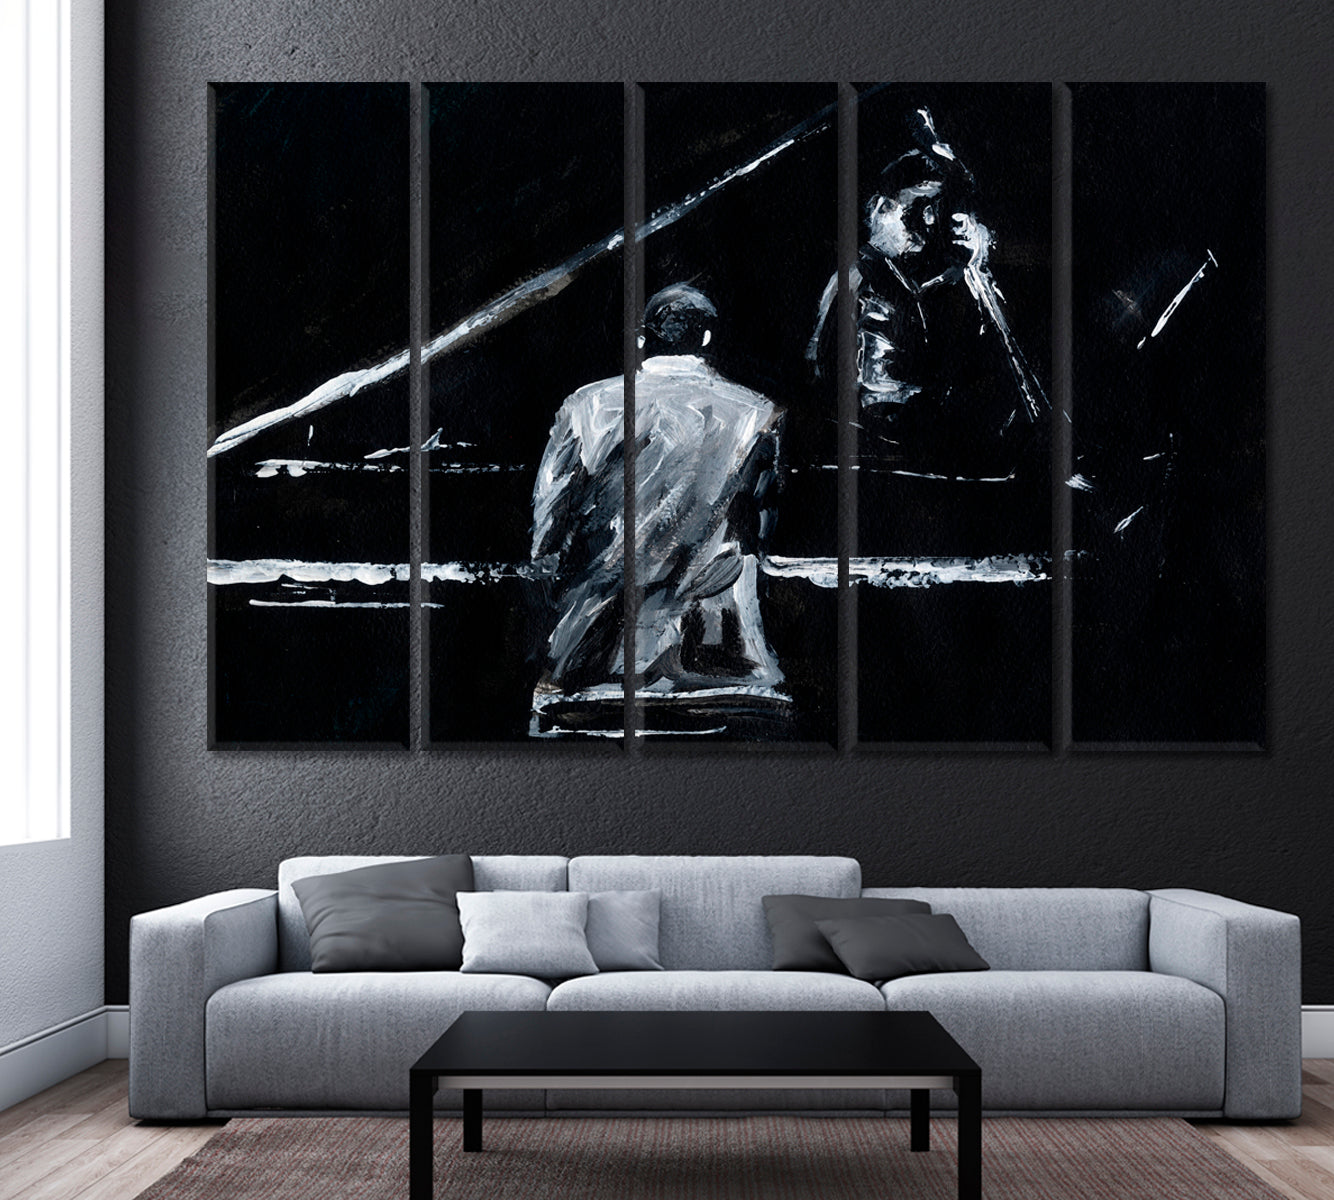 Black and White Abstract Pianist and Contrabassist Canvas Print ArtLexy 5 Panels 36"x24" inches 